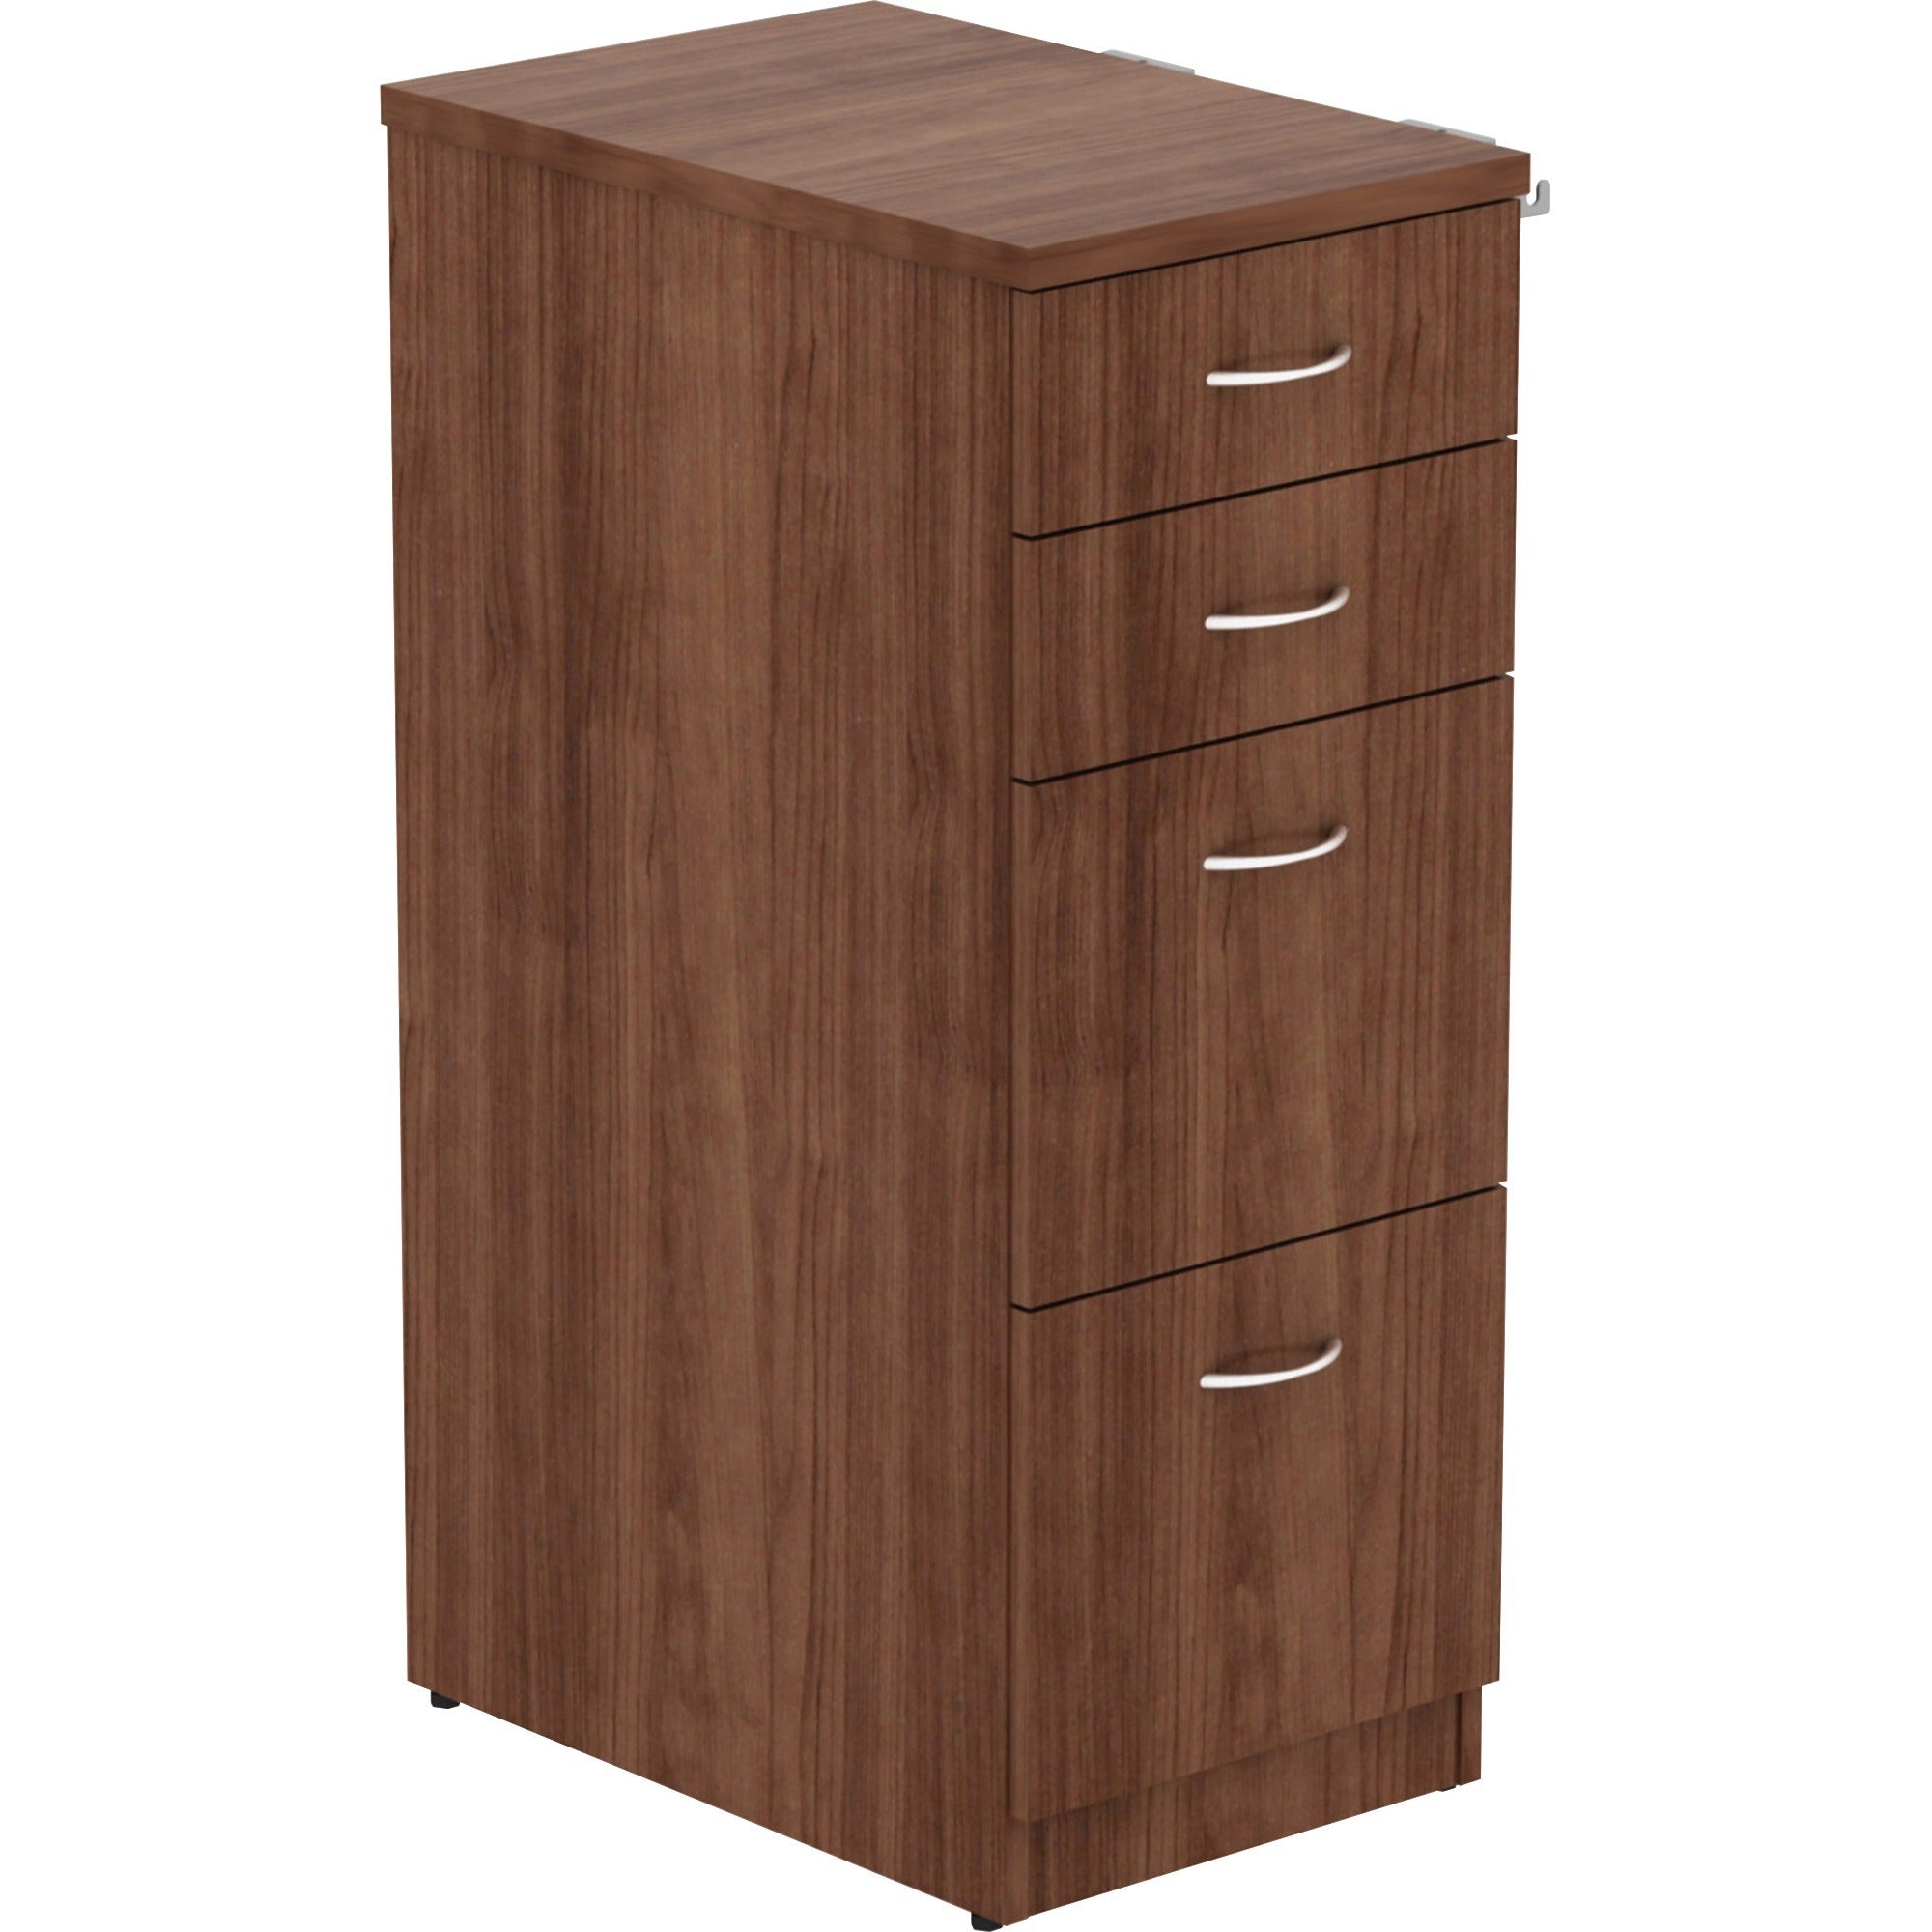 lorell-relevance-series-4-drawer-file-cabinet-155-x-236404-4-x-file-box-drawers-material-laminate-finish-walnut_llr16236 - 1